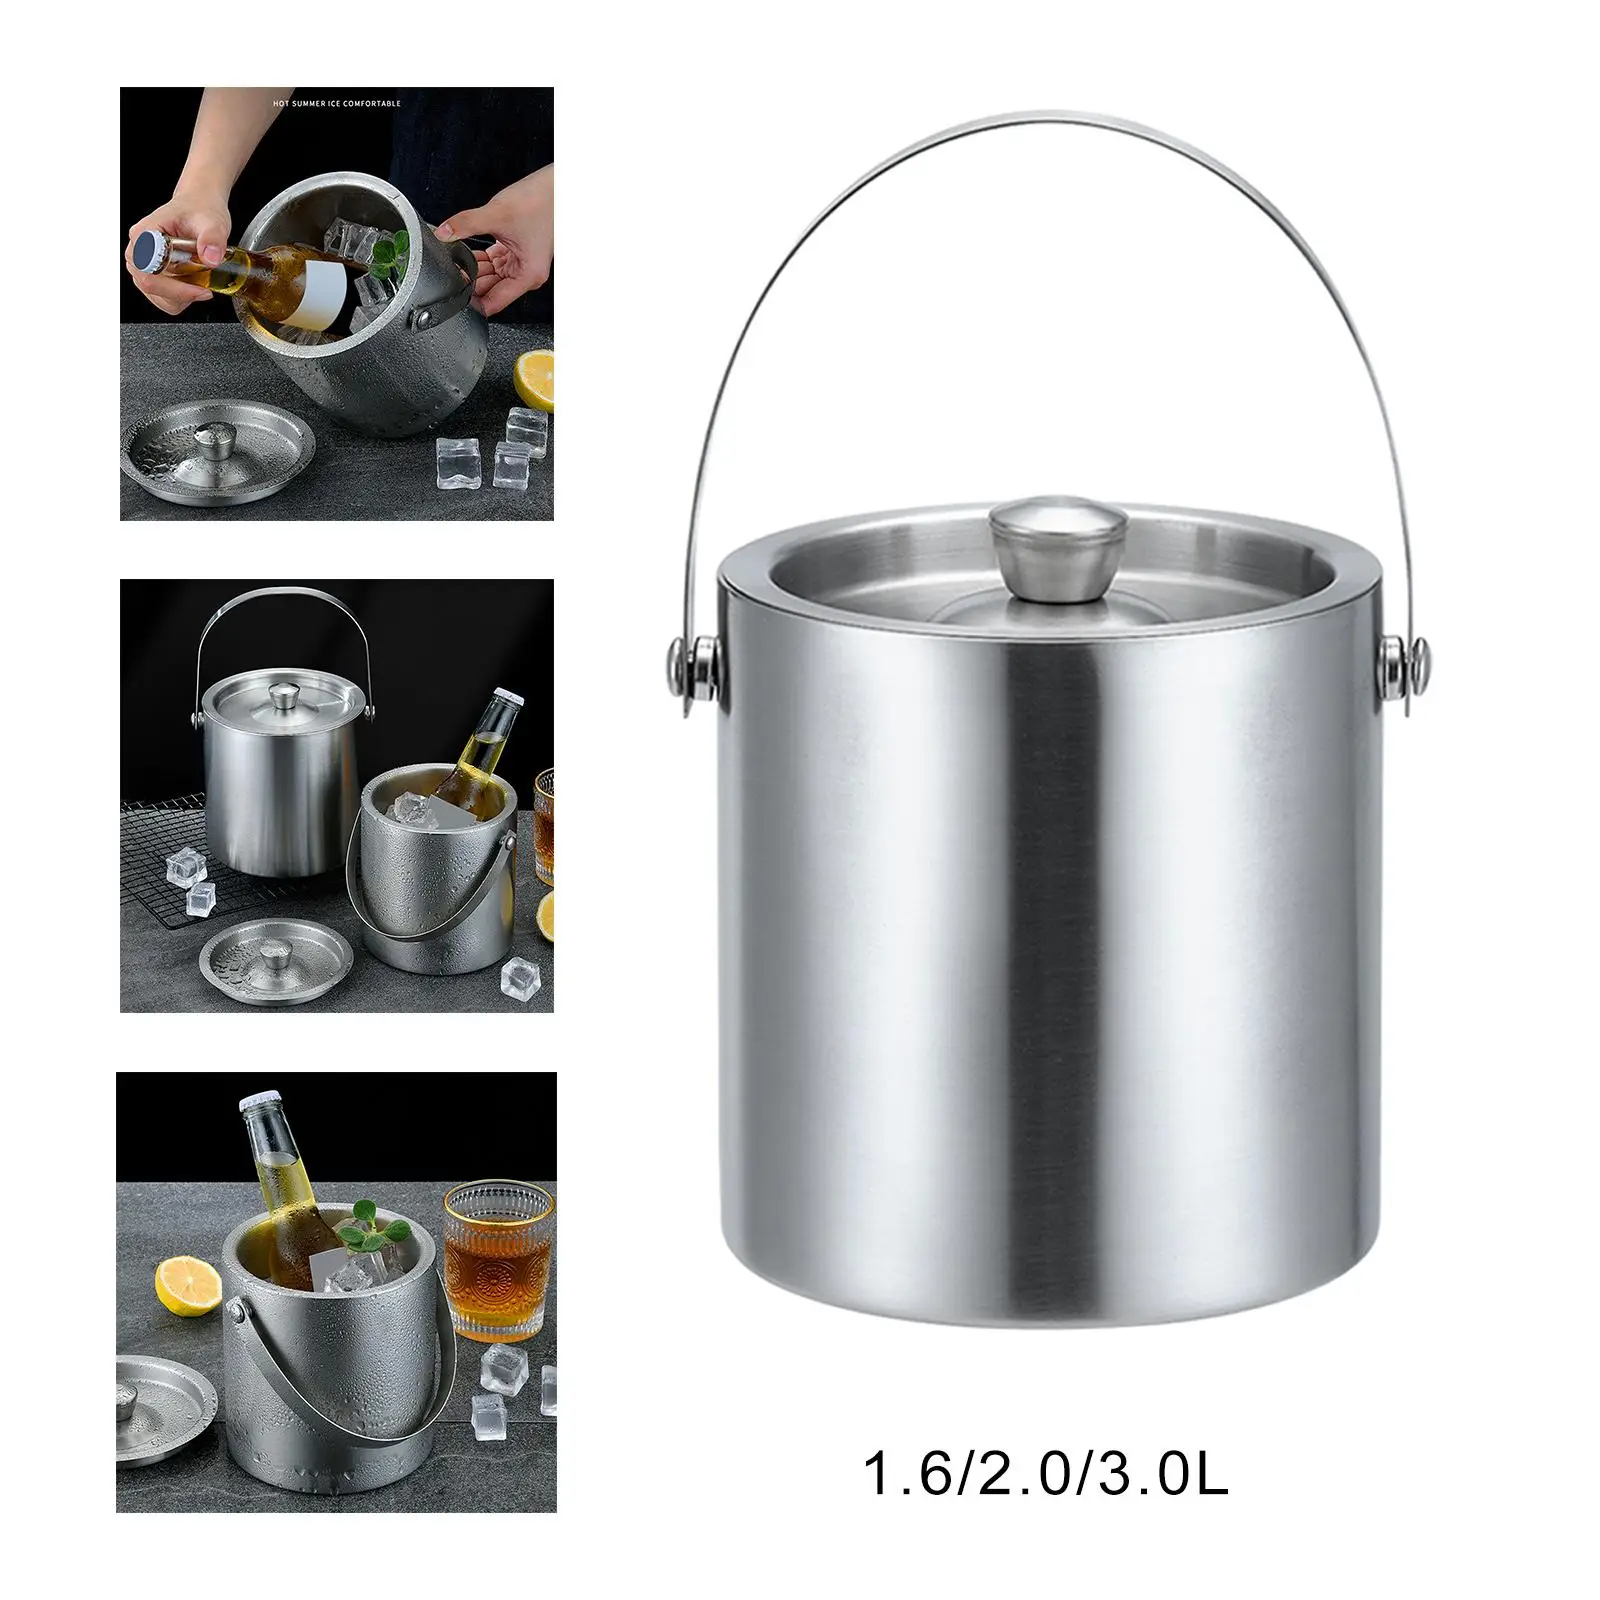 Stainless Steel Ice Bucket Comfortable Carry Handle Beverage Tub Drink Tub for Chilling Beer Champagne Cocktail Parties Home Bar